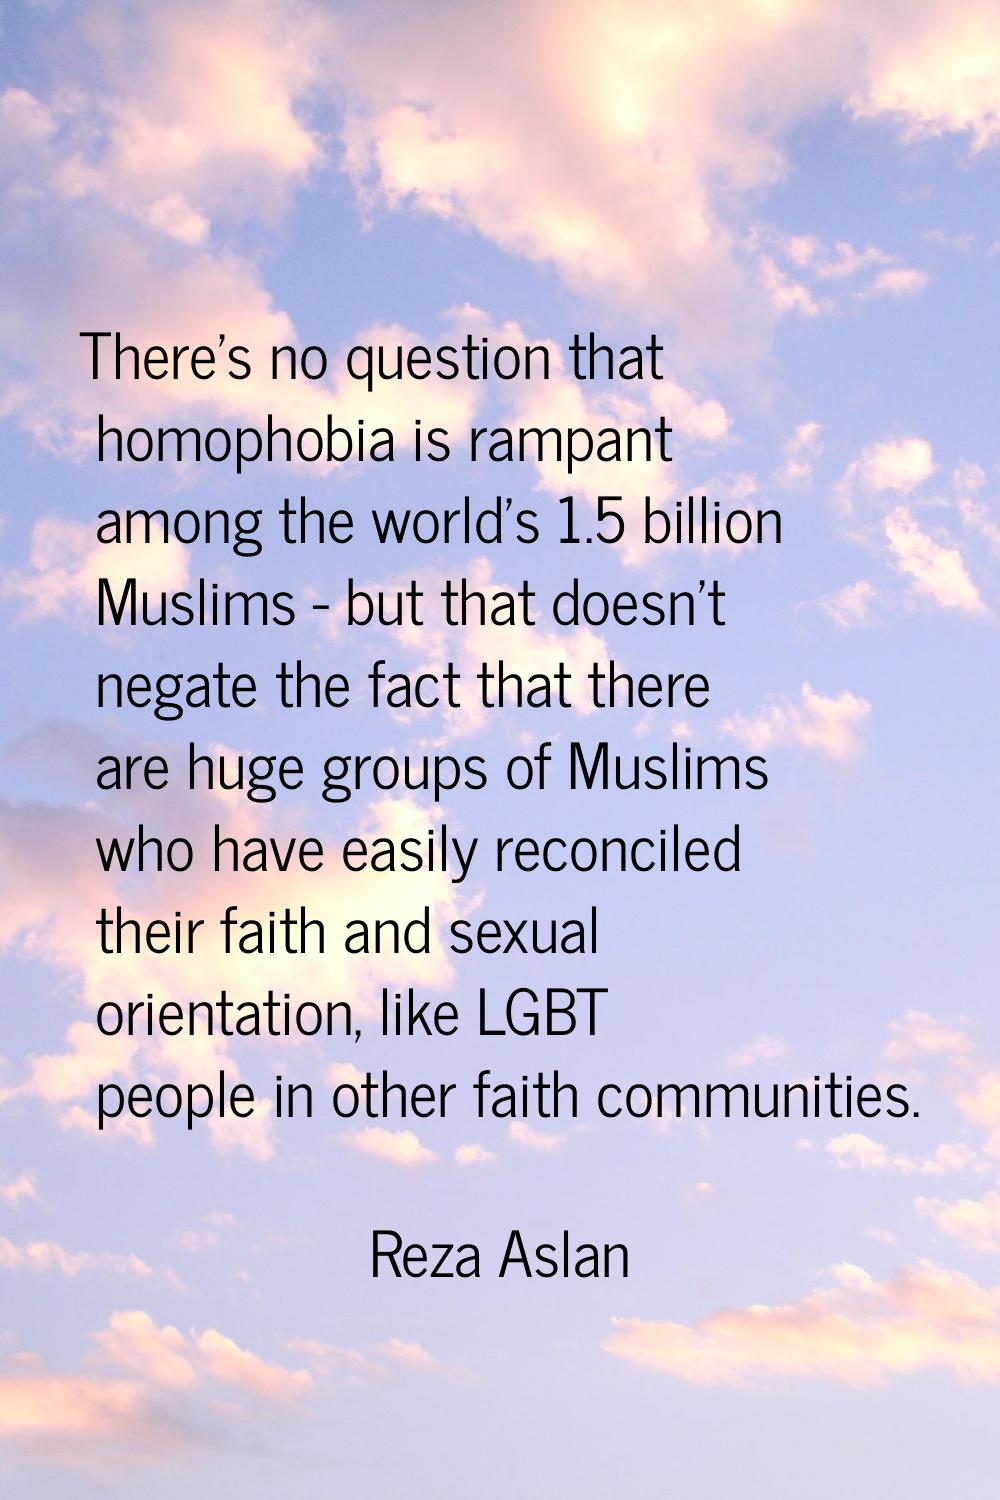 There's no question that homophobia is rampant among the world's 1.5 billion Muslims - but that doe